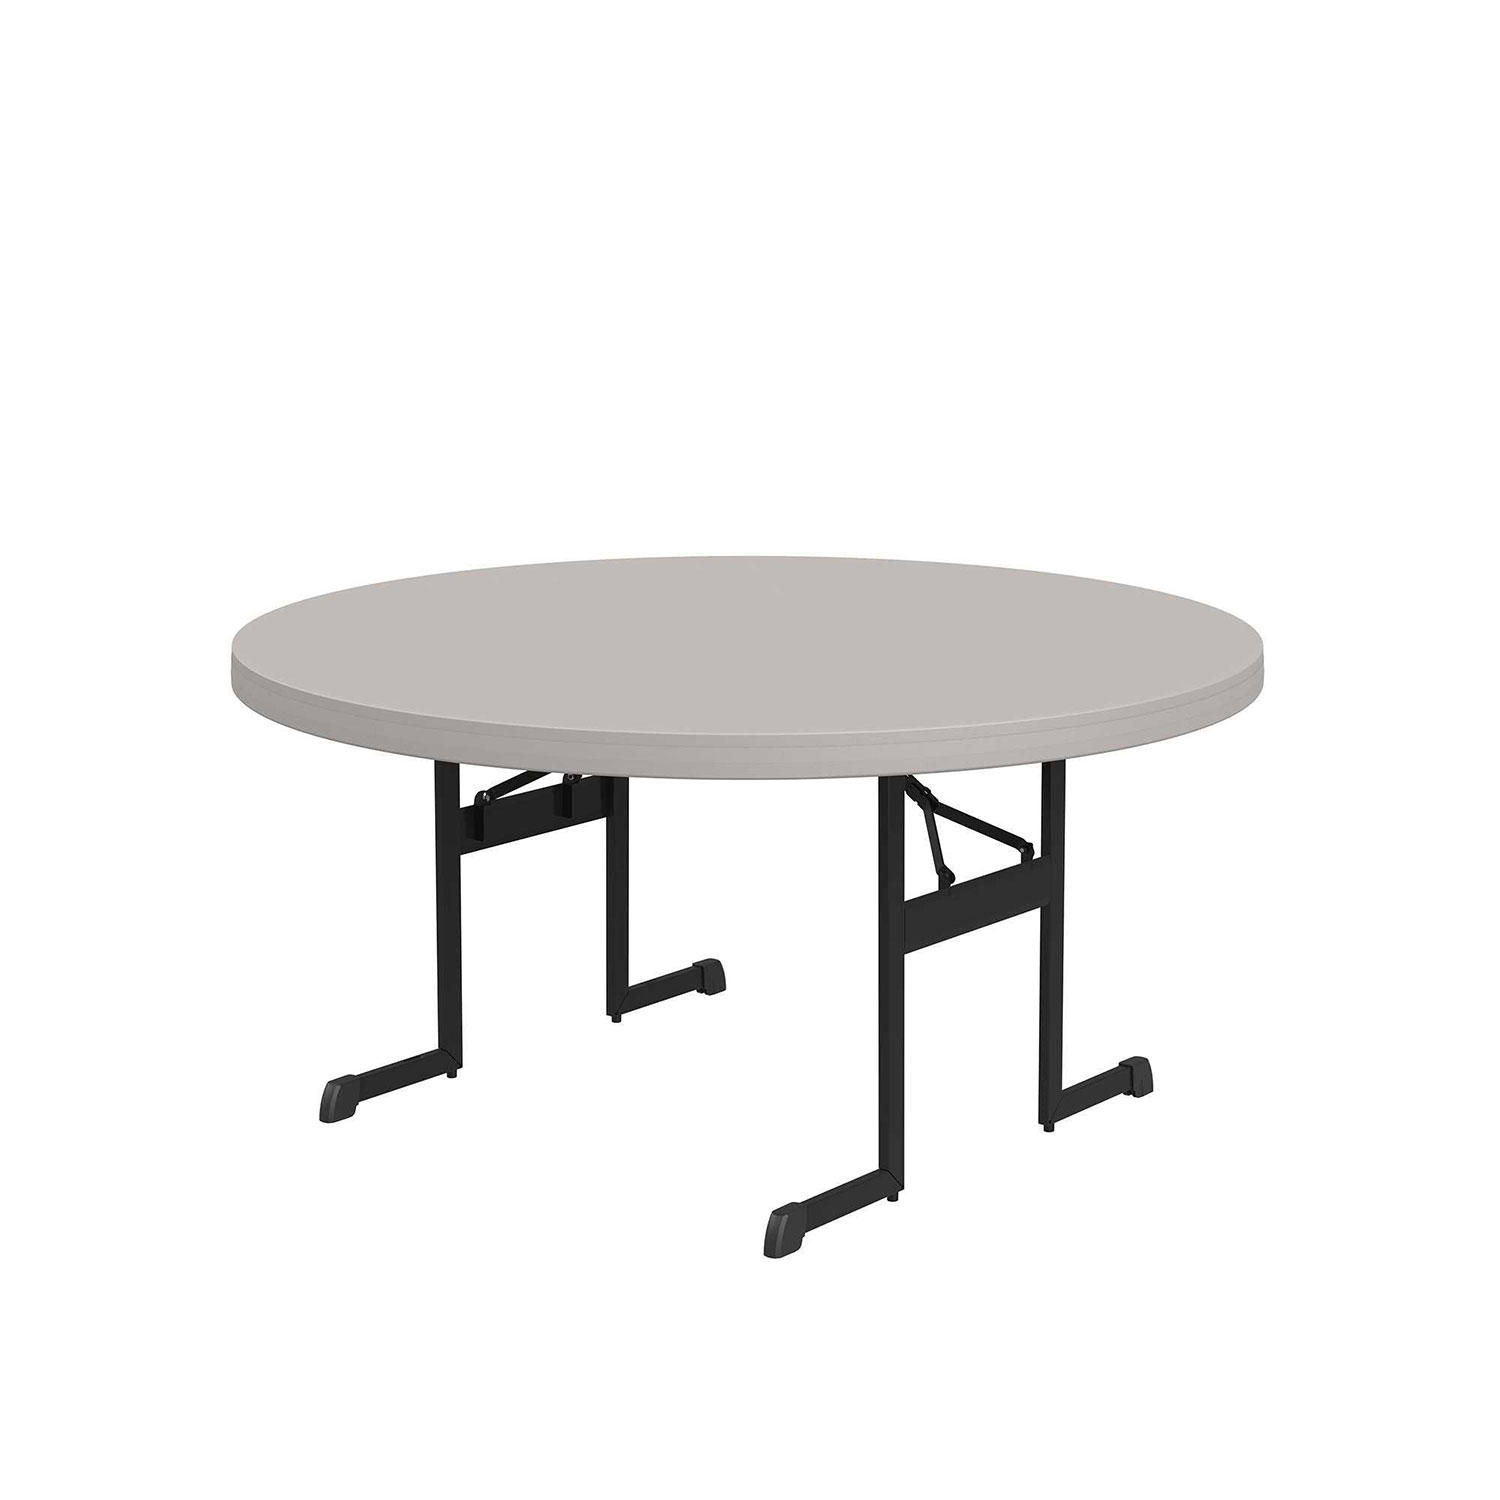 Lifetime 60' Round Professional Grade Table, Putty